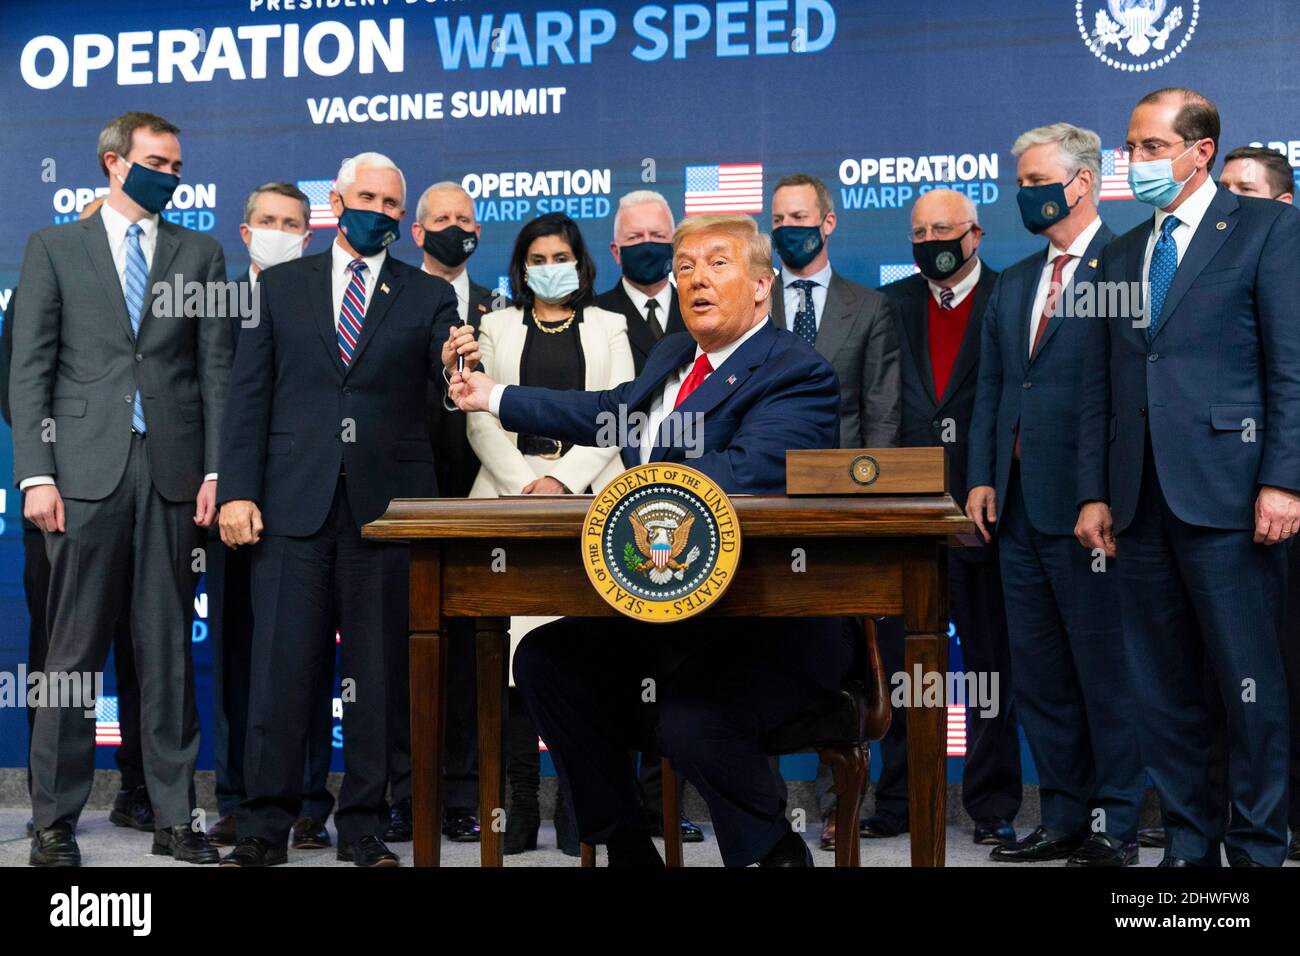 WASHINGTON DC, USA - 08 December 2020 - President Donald J. Trump, joined by Vice President Mike Pence and senior White House staff, signs an Executiv Stock Photo